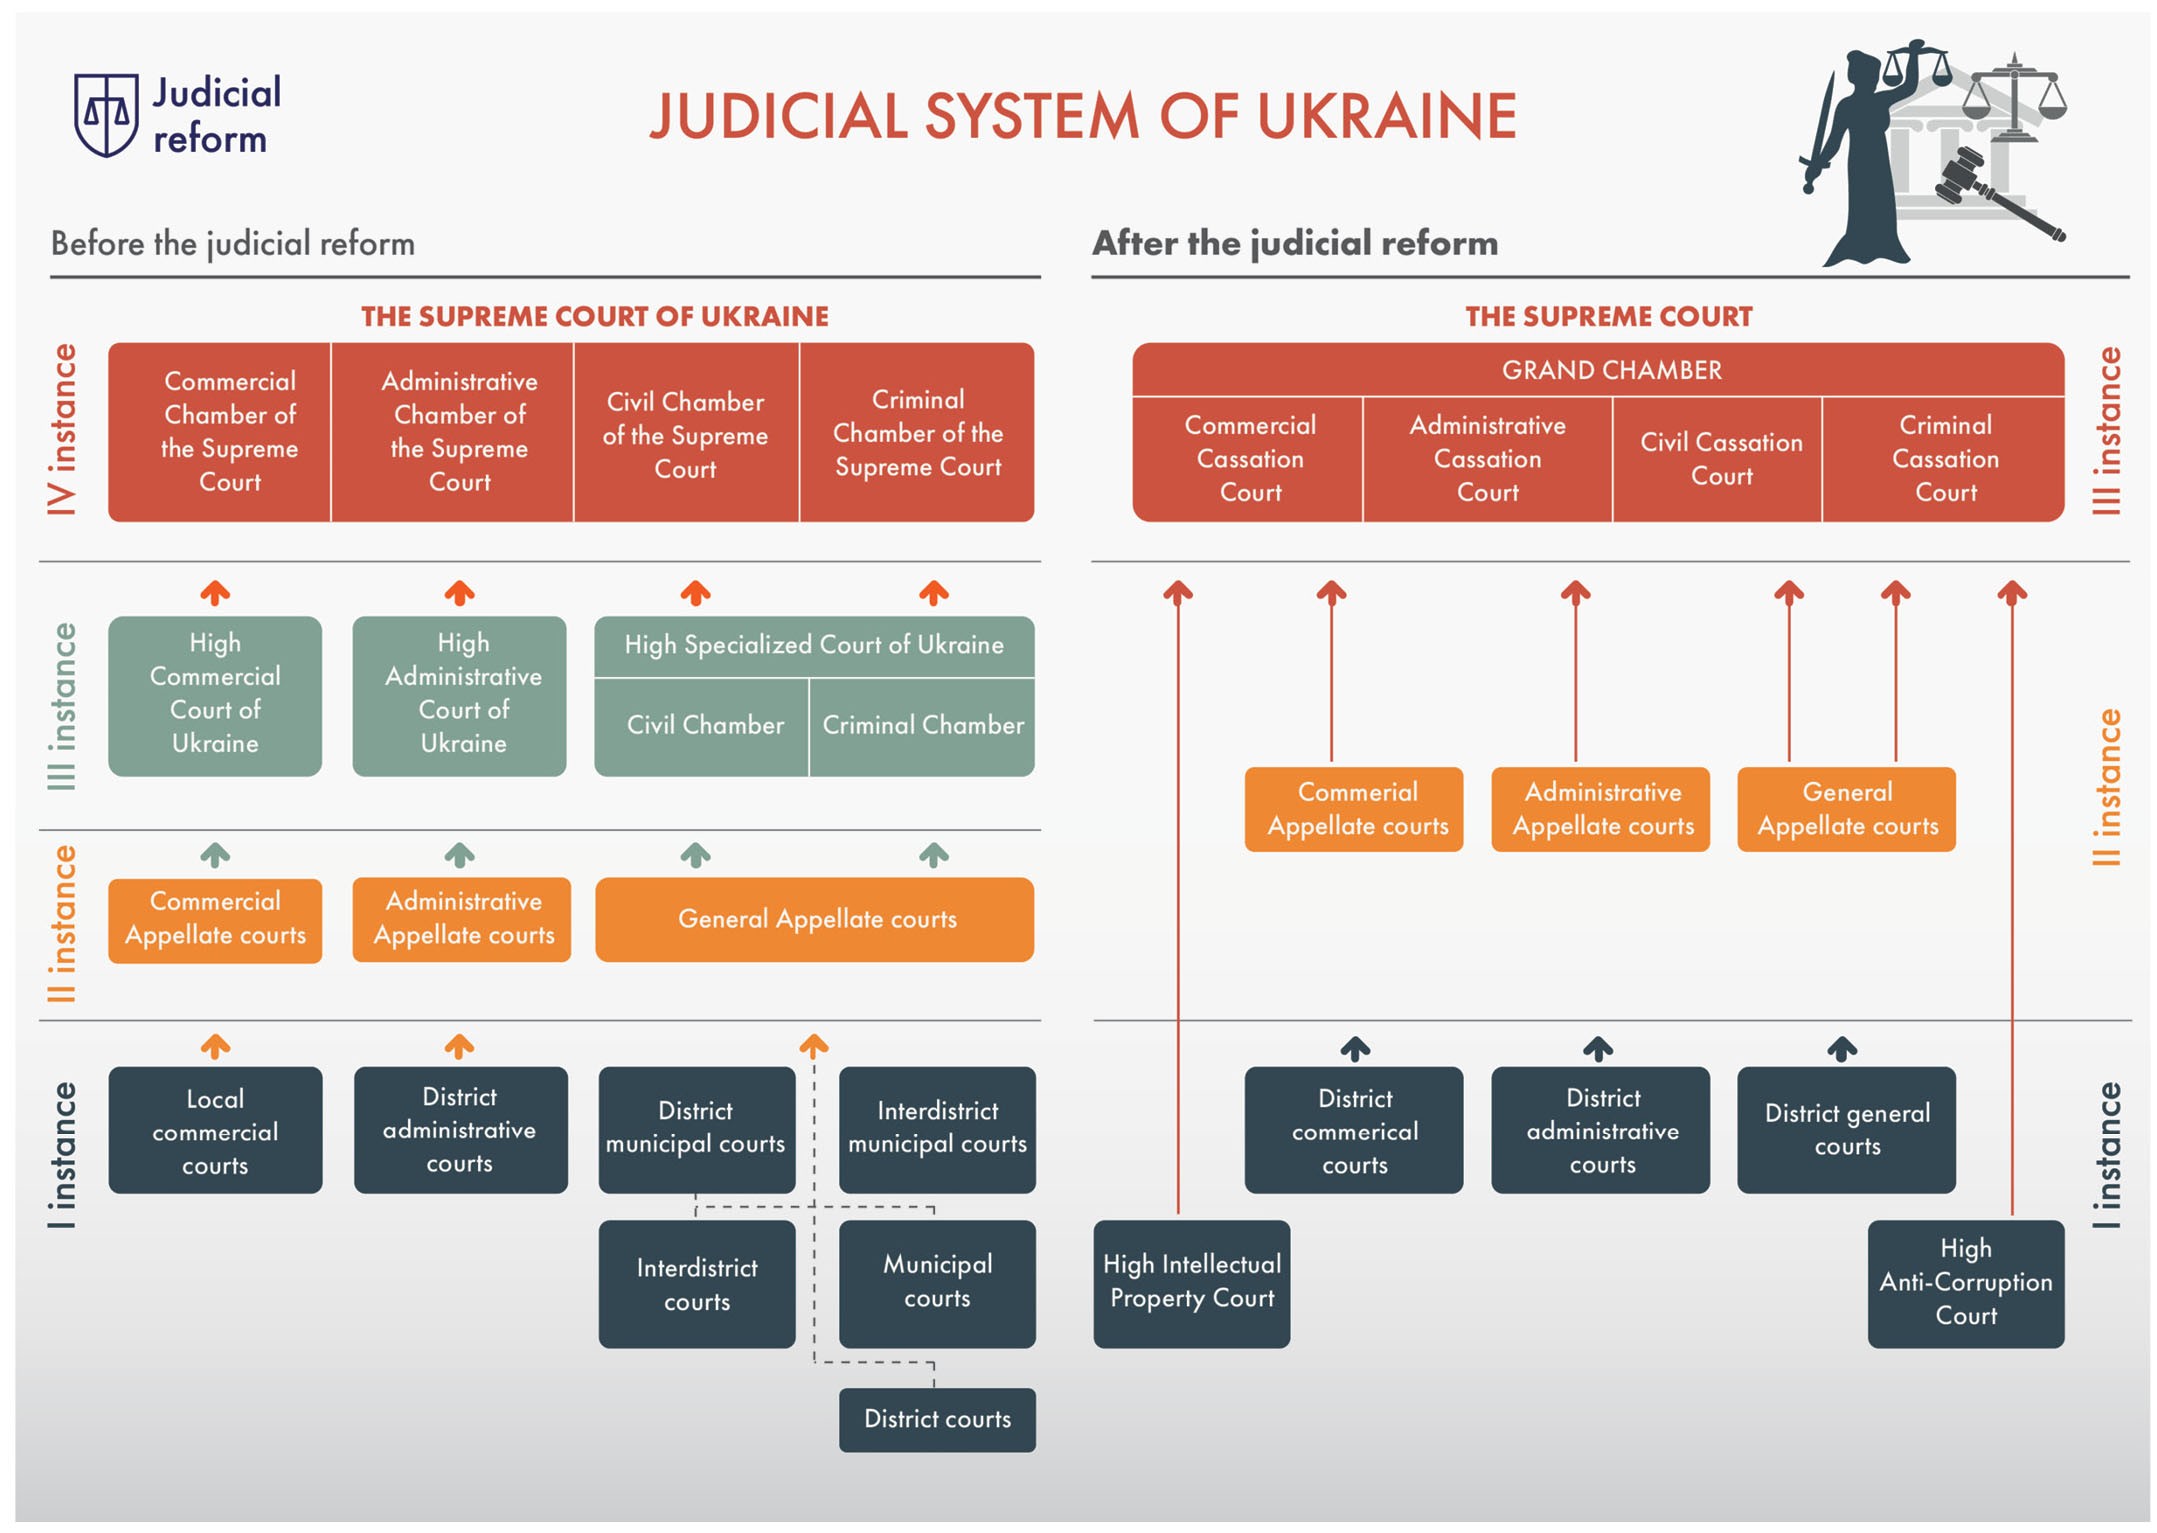 Ukraine’s judicial reform removes a layer of courts – from four to three levels. The three levels are: courts of first instance, three appellate courts and then the Supreme Court’s Grand Chamber, subdivided into four specialities – the highest appeals, or so-called third instance, courts.